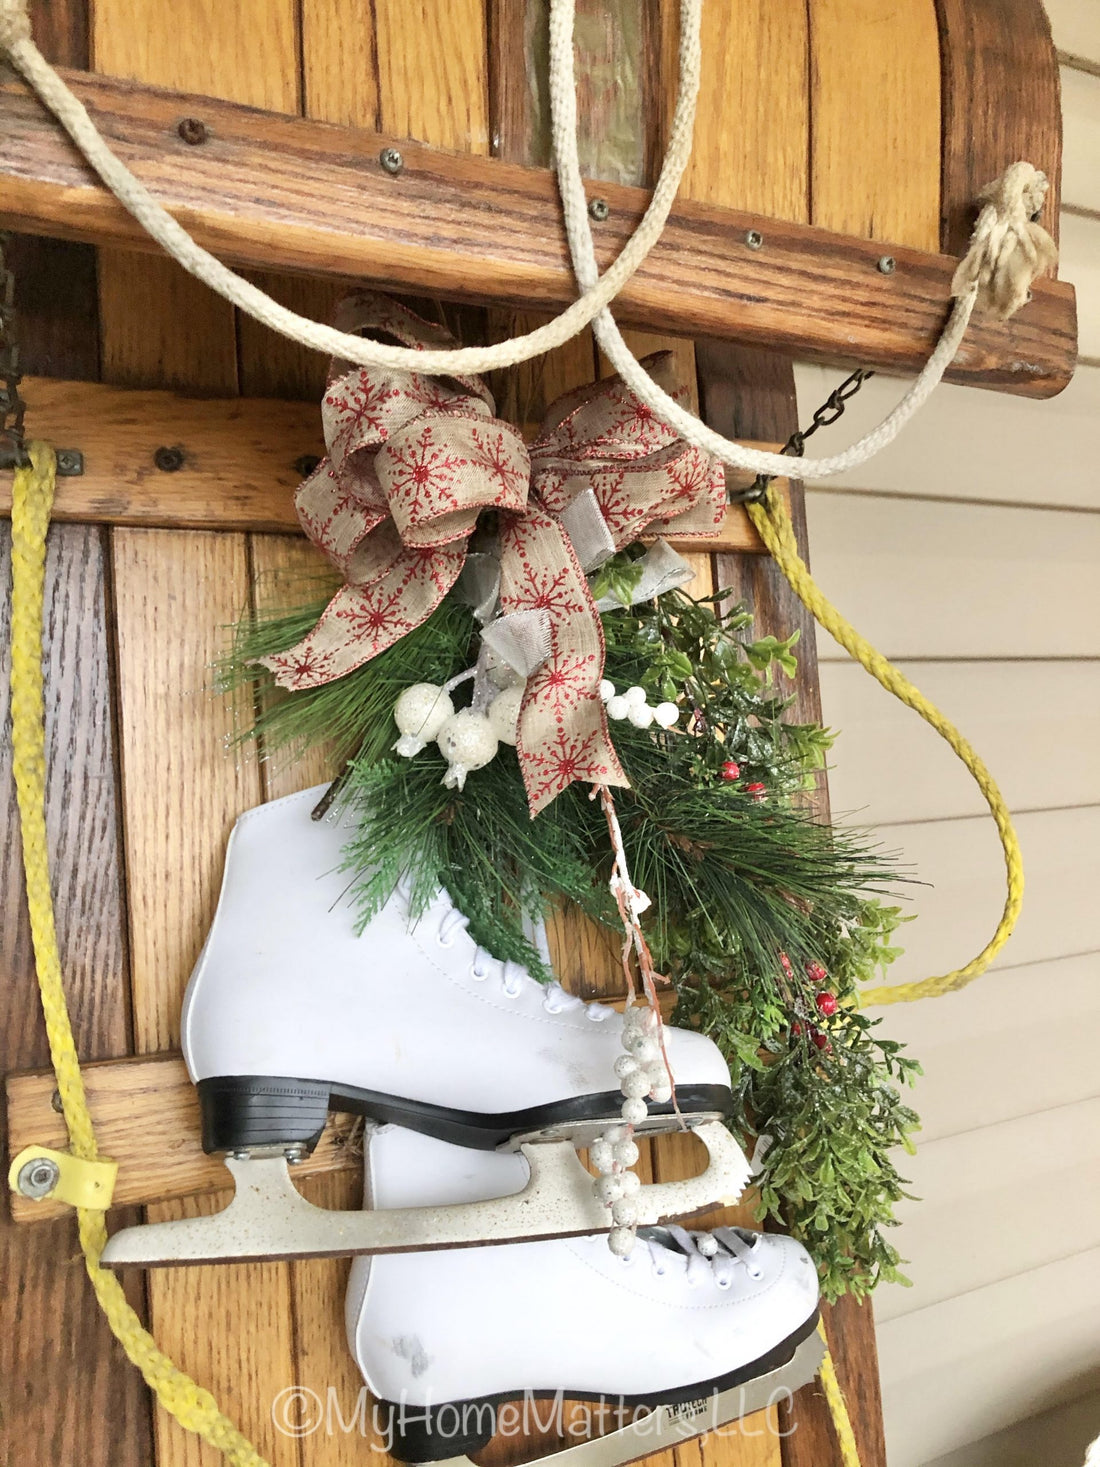 Incorporating Sleds into your Christmas Decor